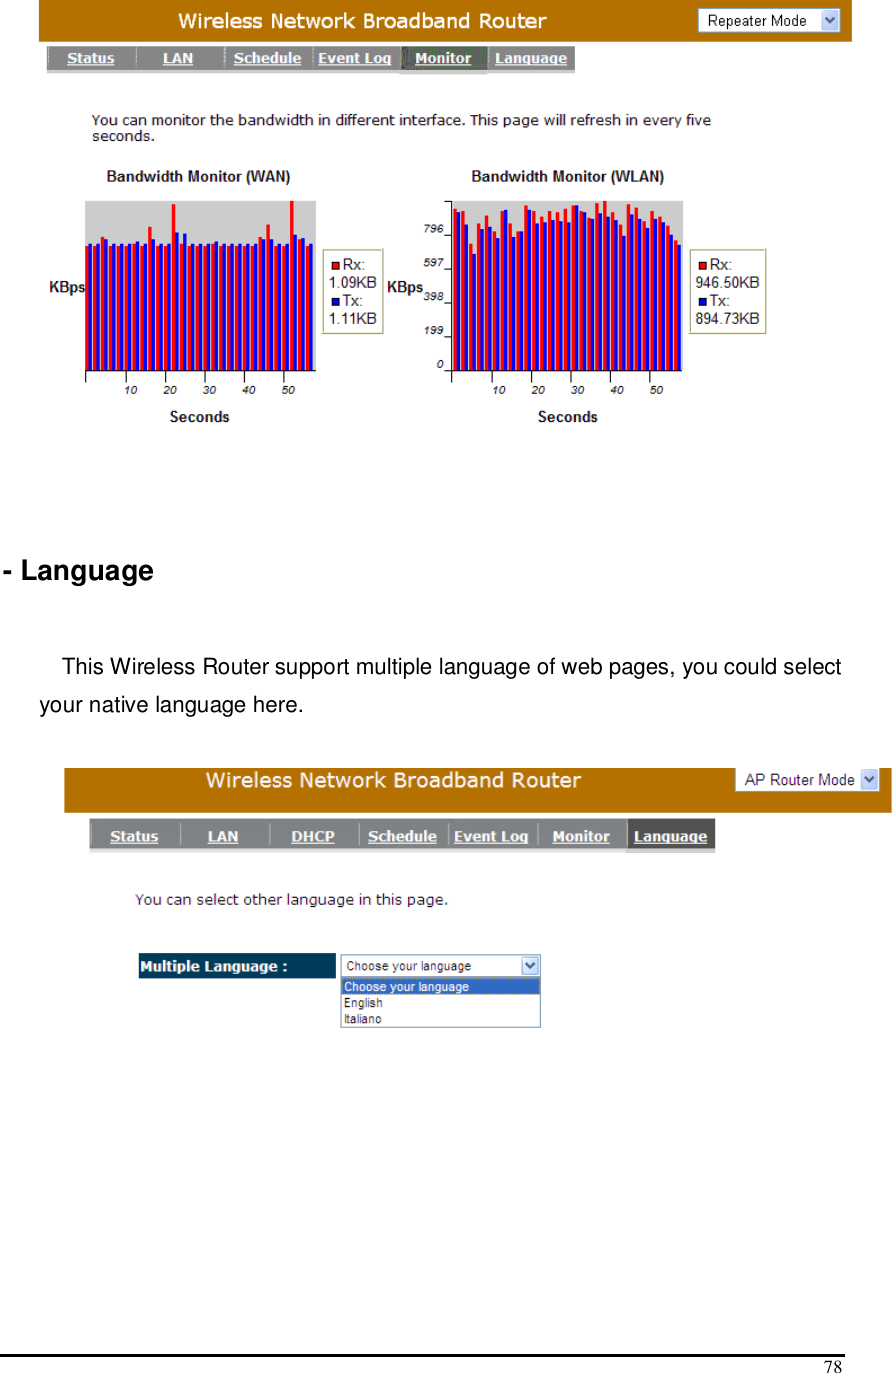  78    - Language  This Wireless Router support multiple language of web pages, you could select your native language here.         